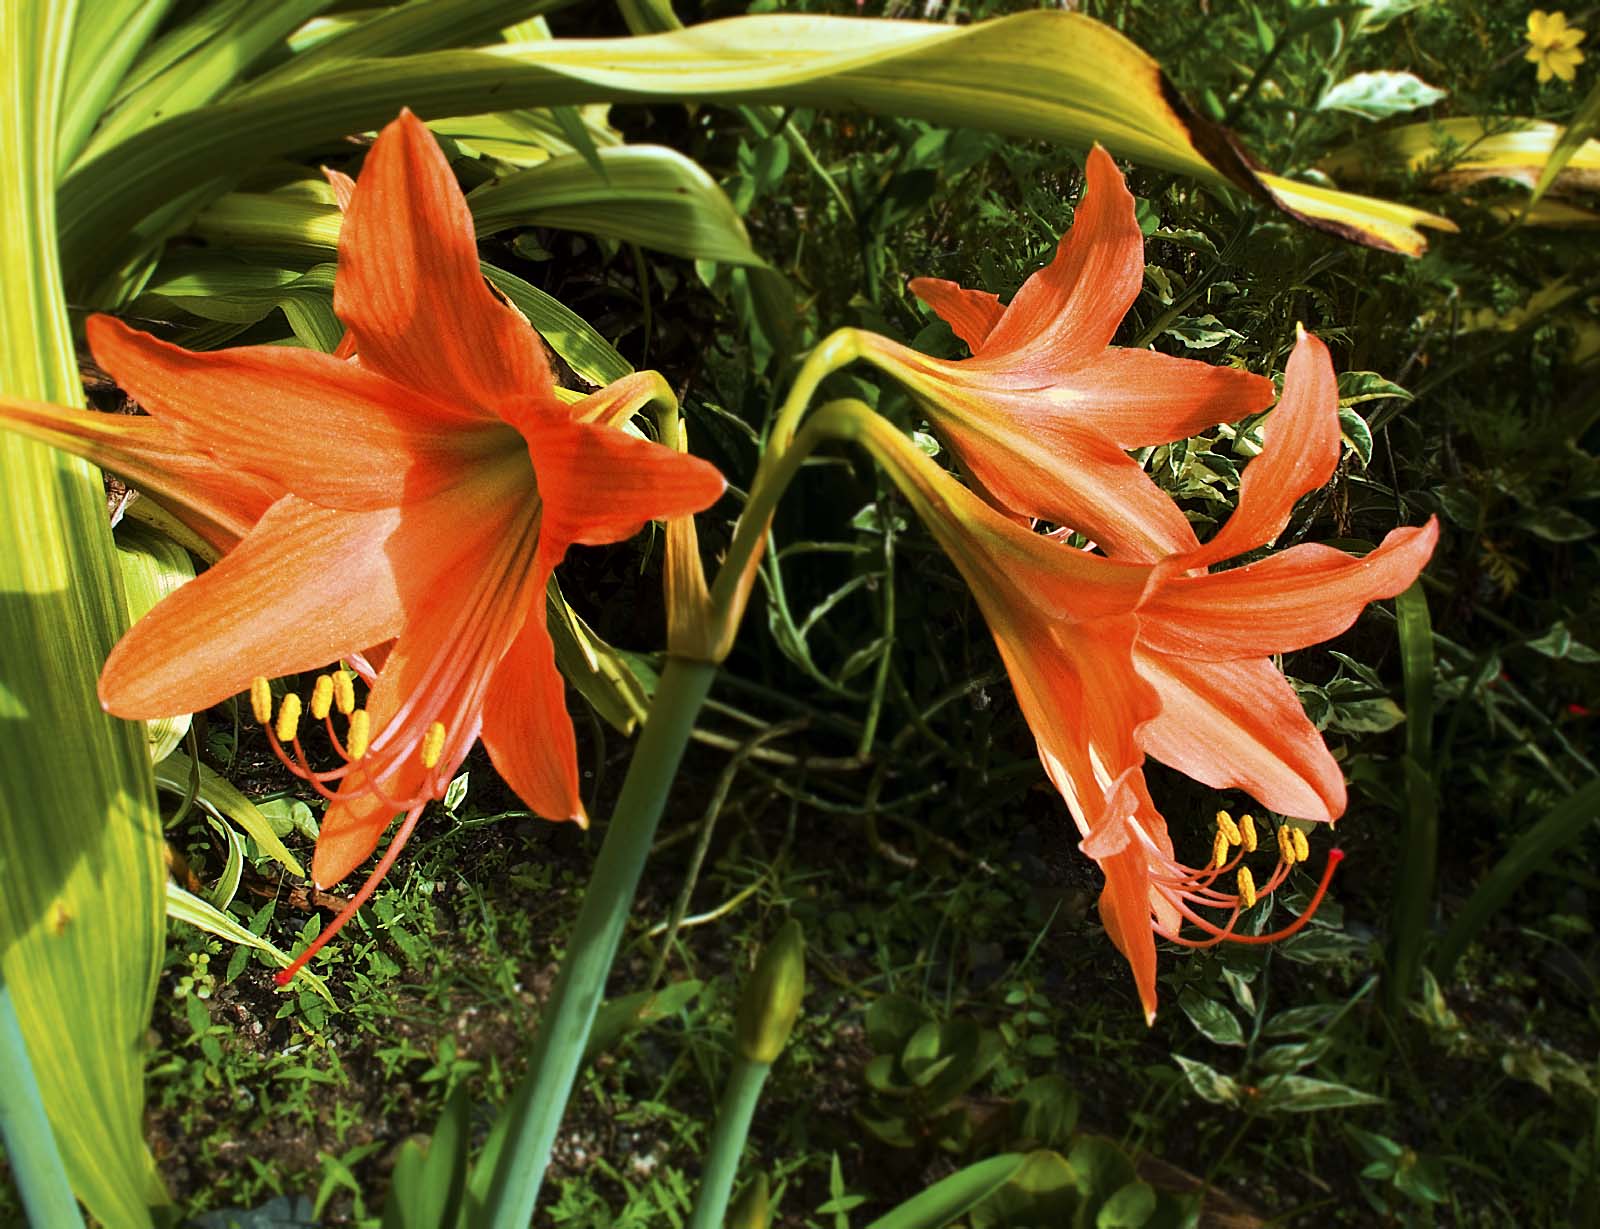 without the orange lilies